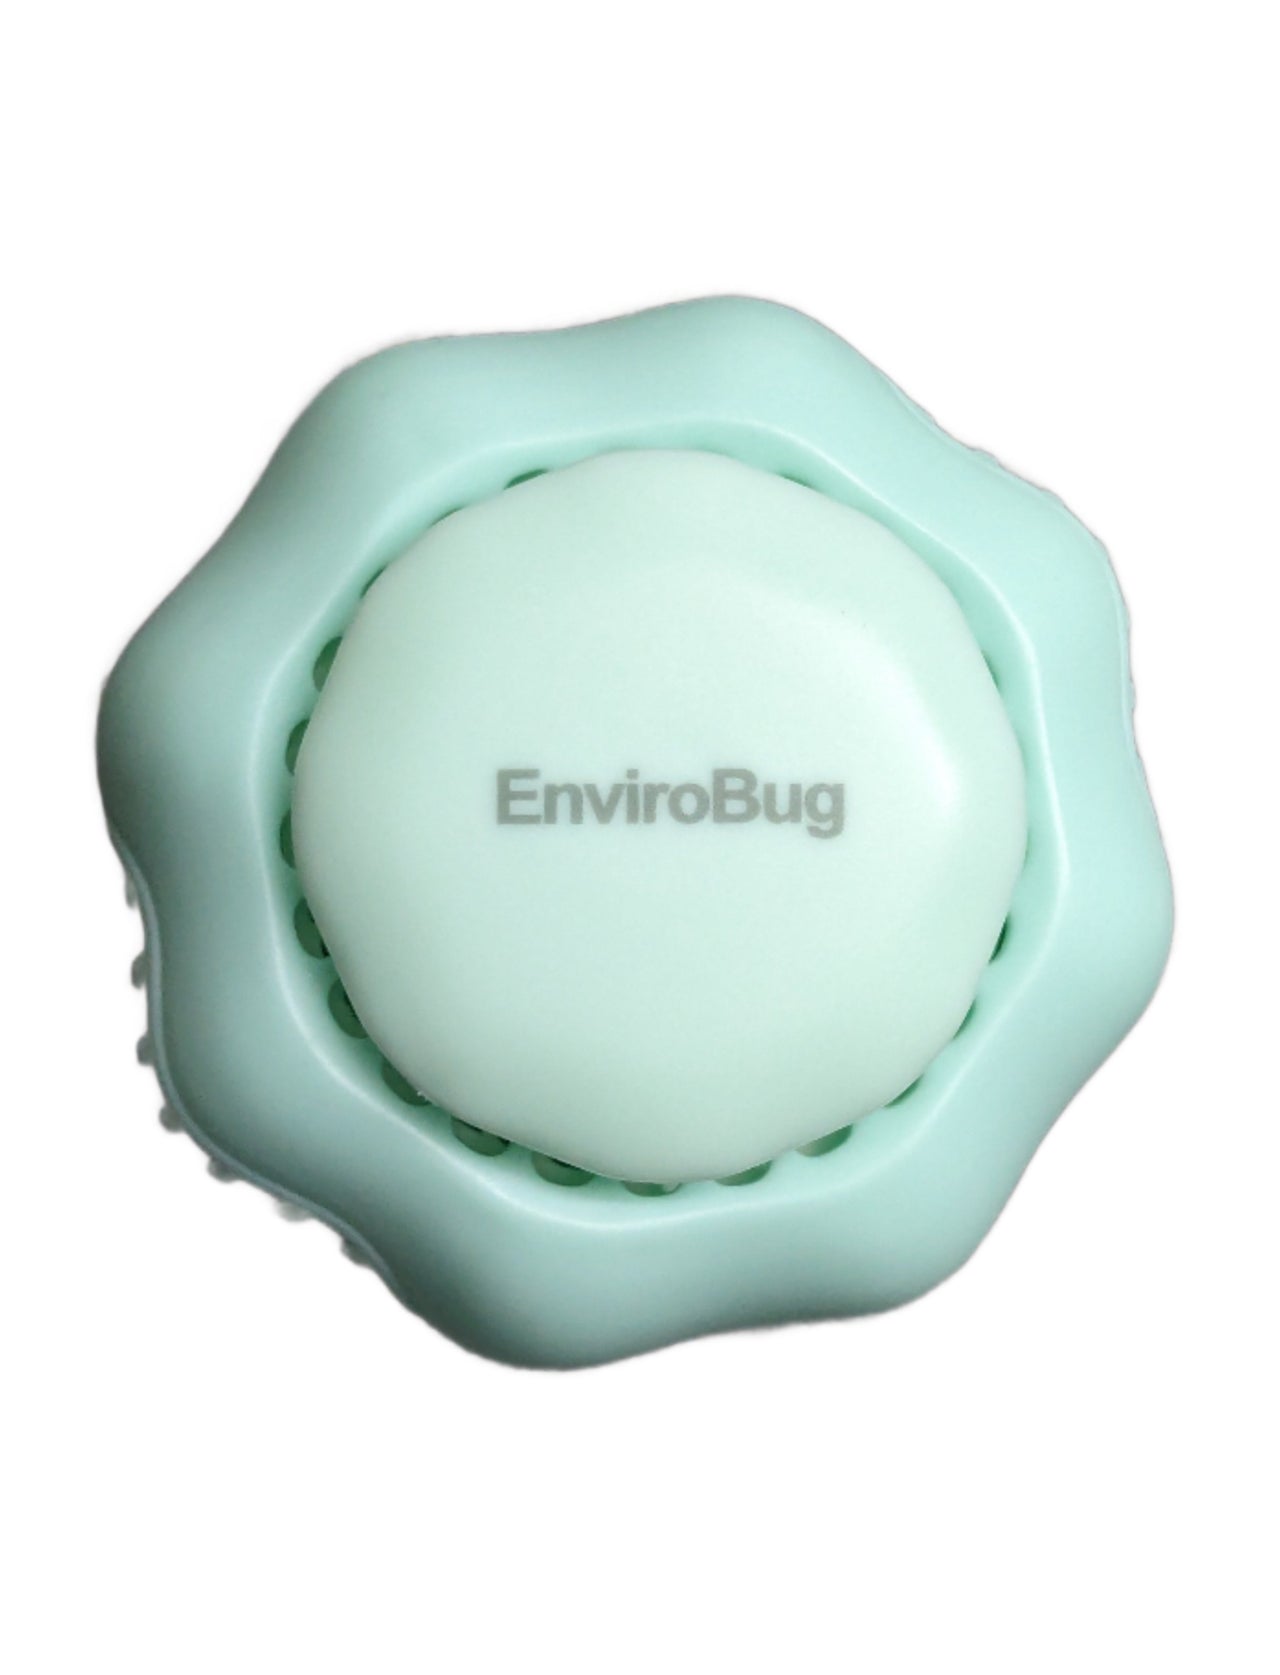 Mozzie Mist Personal Insect Repeller - Envirobug